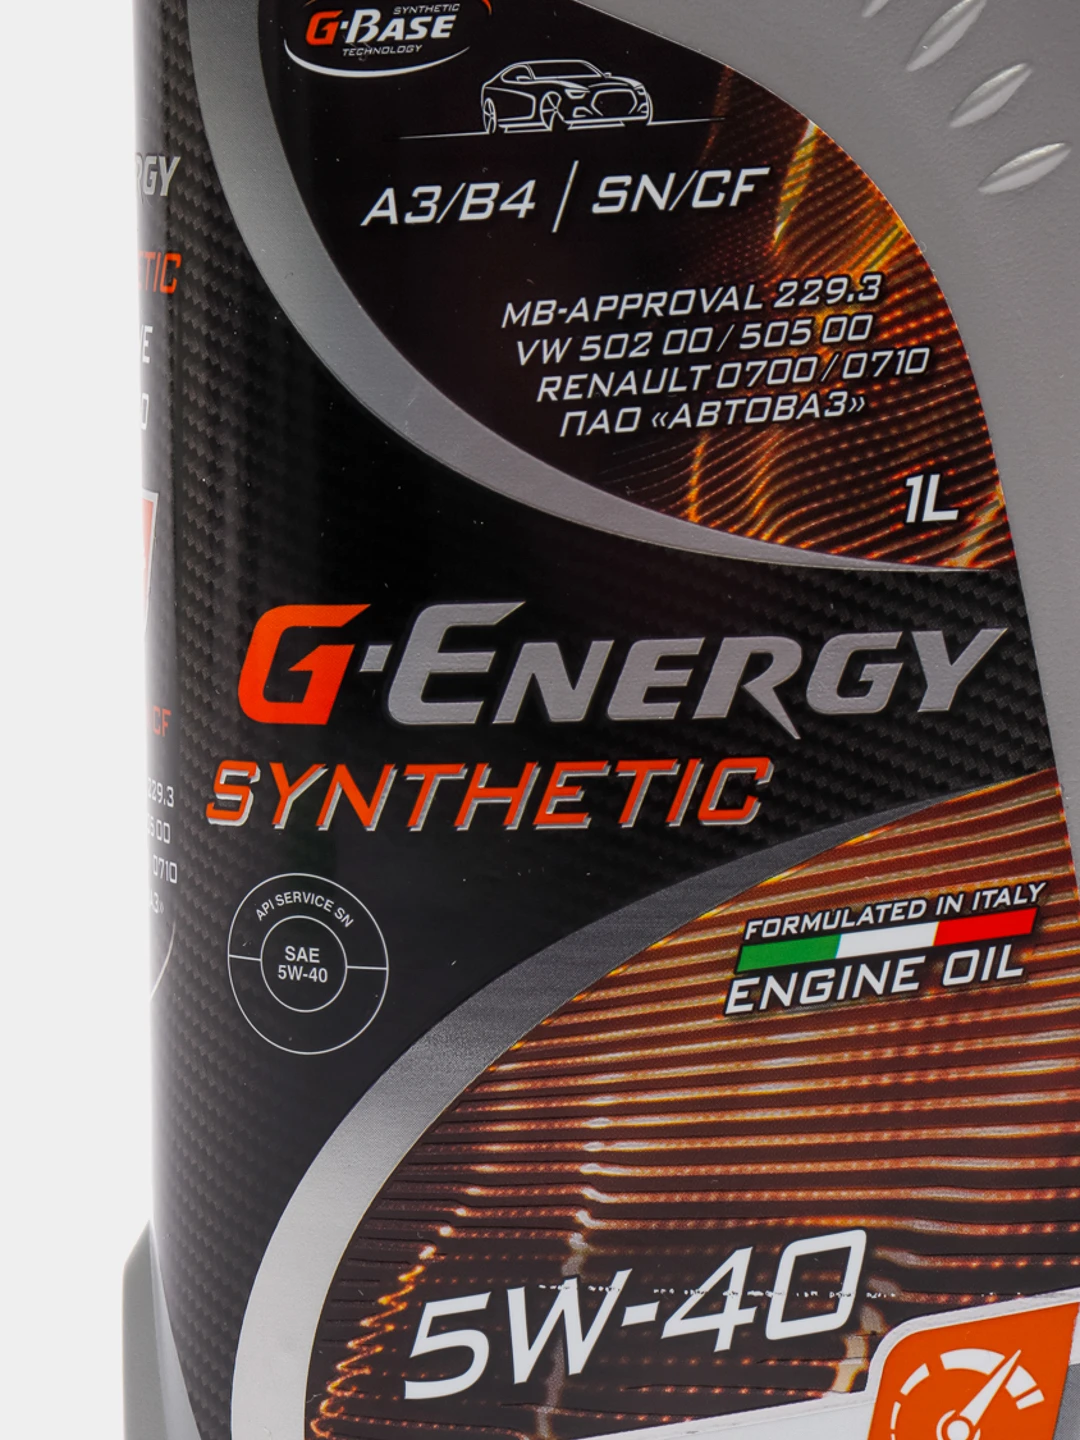 G-Energy Synthetic Active 5w-40. G-Energy Synthetic Active 5w-30. G Energy 5w40 Active. Лукойл Джи Энерджи 5w40. Energy synthetic active 5w40